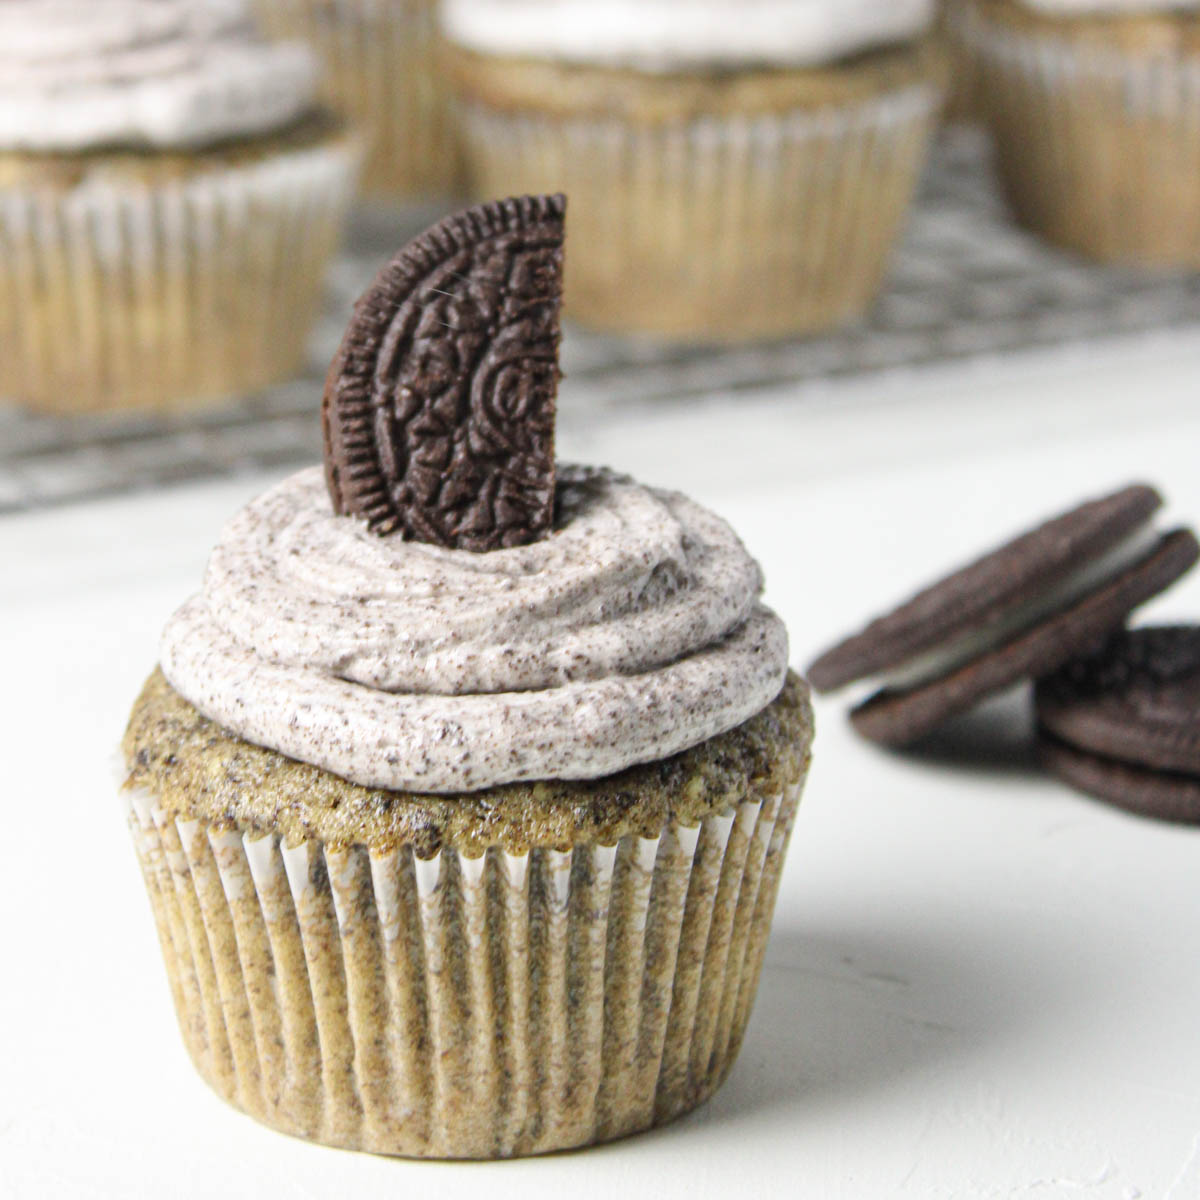 Cupcake with half an Oreo on top with cupcakes in the background.